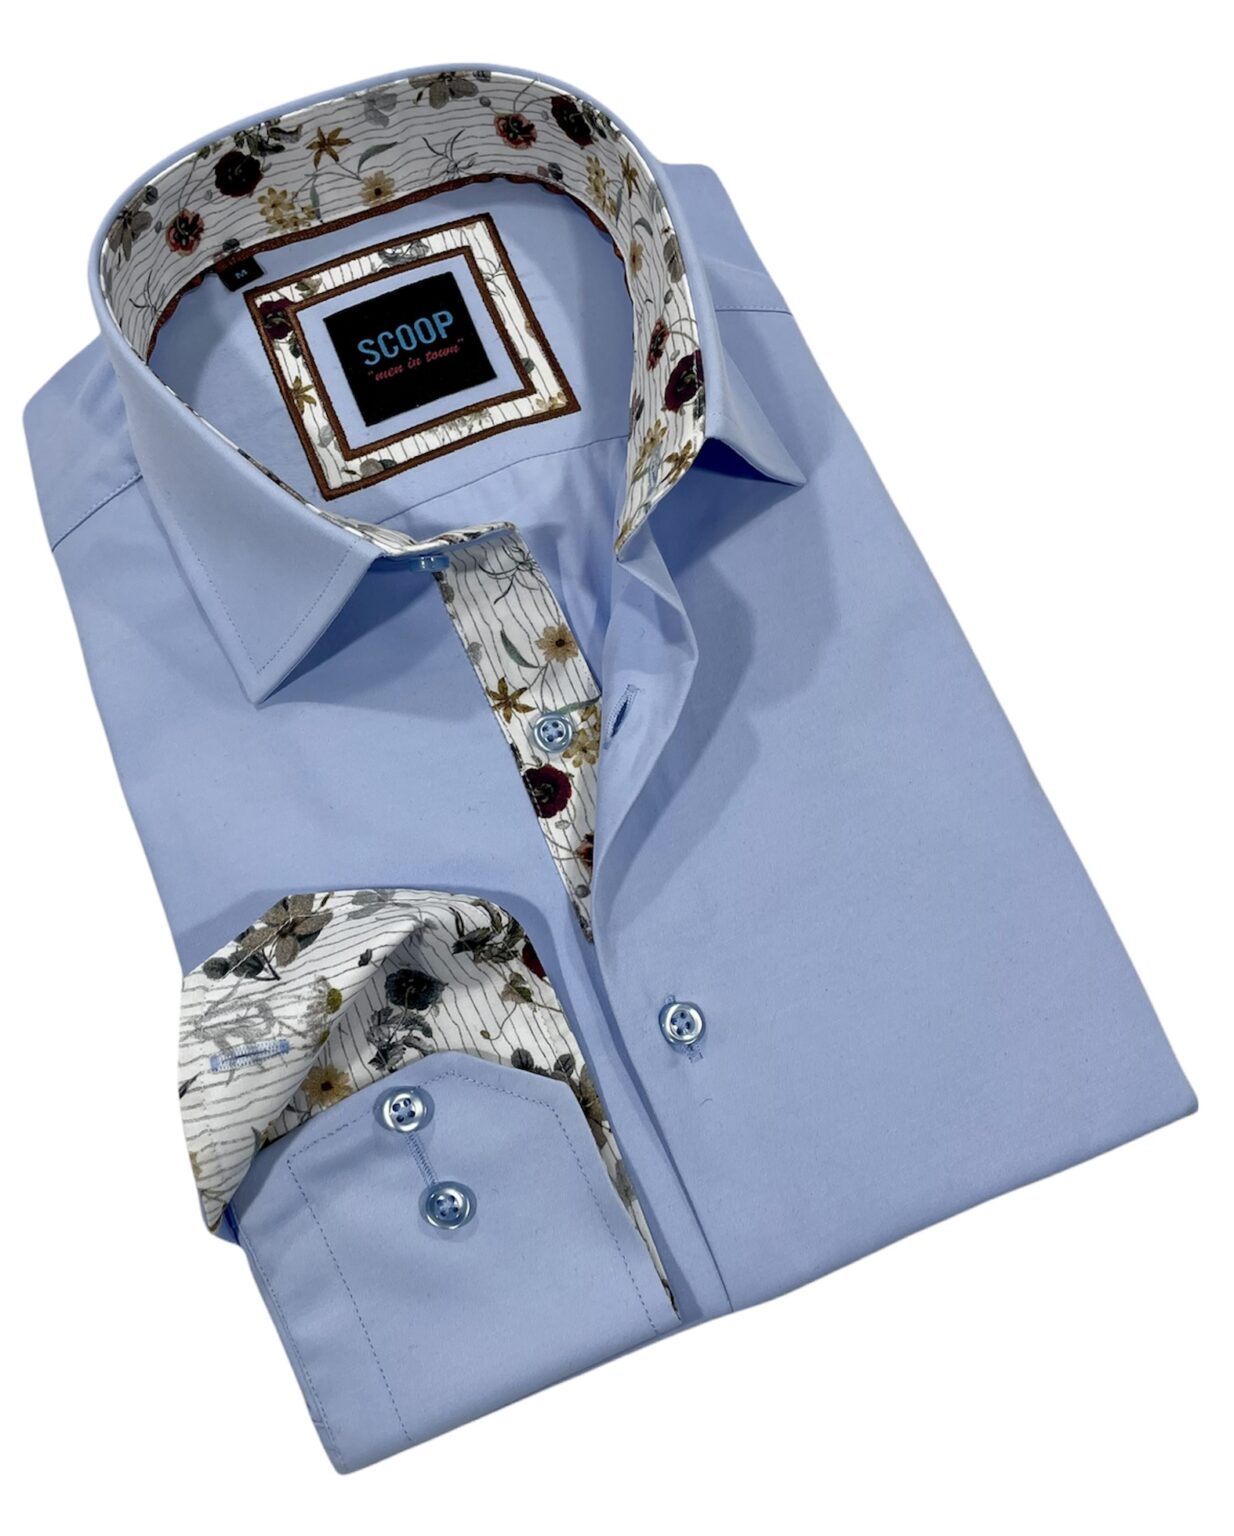 This versatile, powder blue dress shirt from Scoop is a must-have in any man's business wardrobe. The fun pattern inside the collar and cuffs adds enough character to this men's top from Scoop, separating it from your plain powder blue dress shirts.